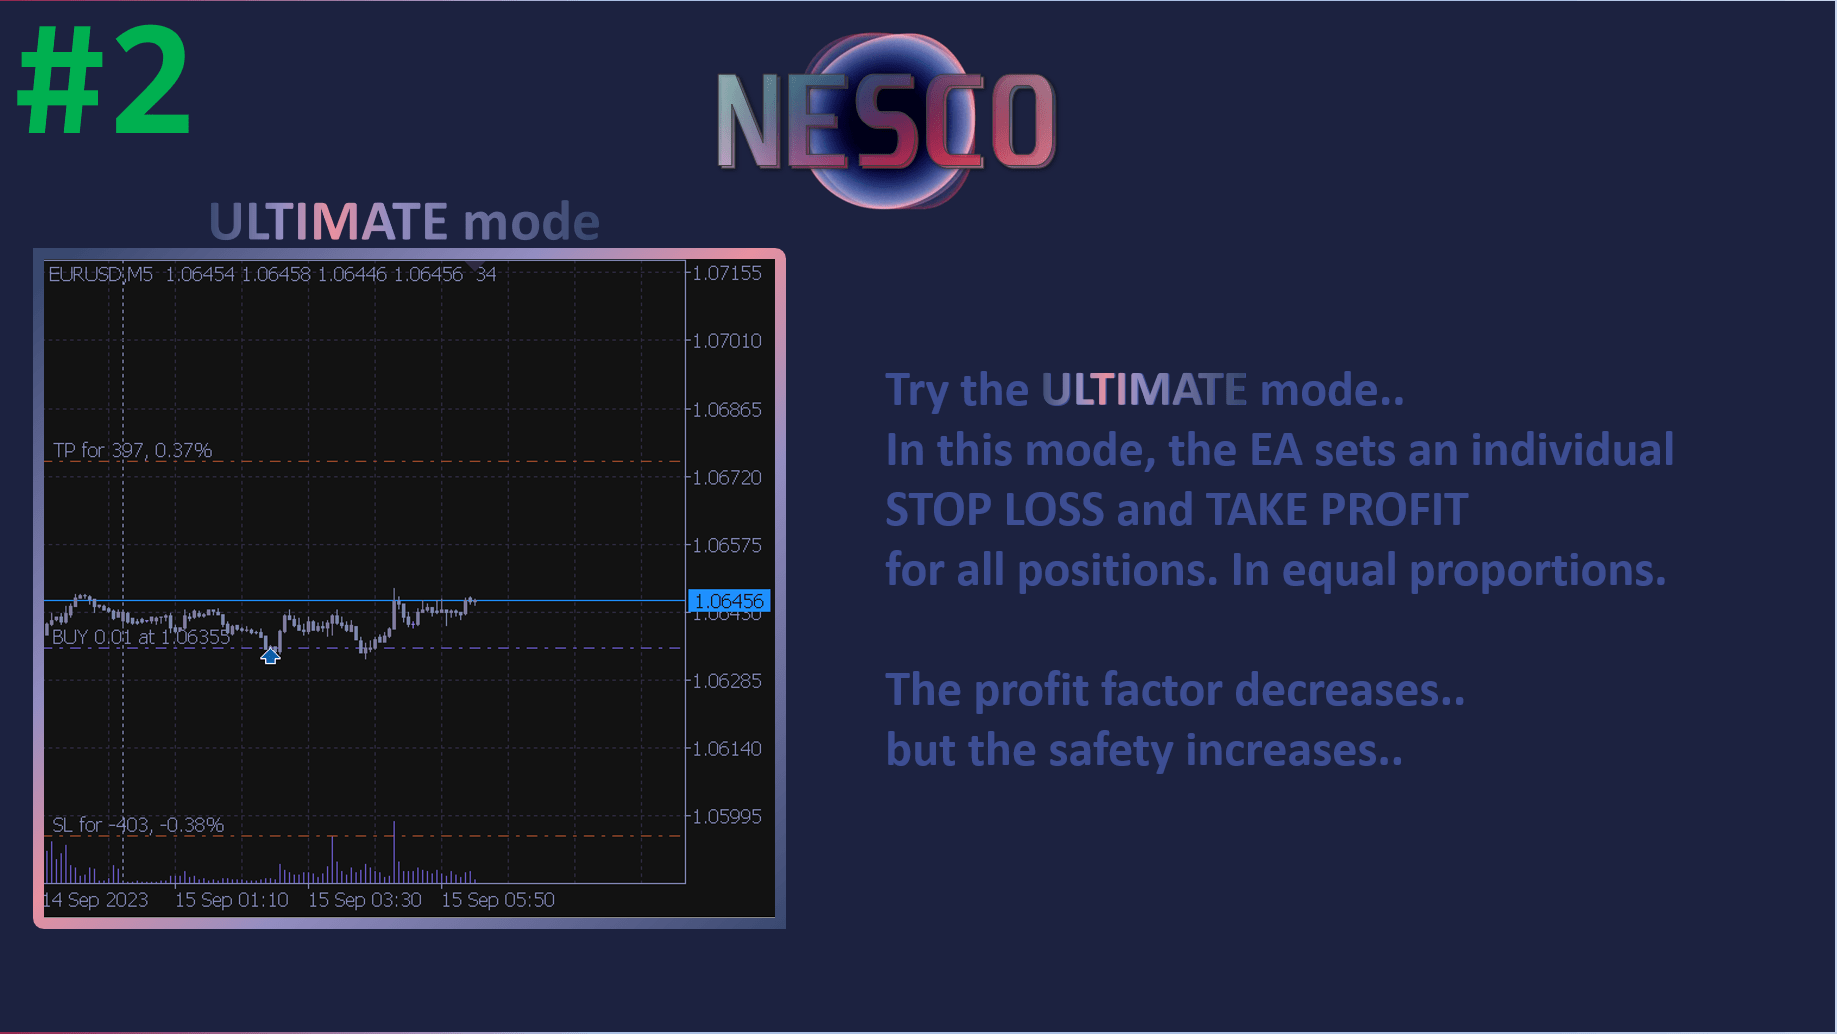 The Nesco MT4 Expert Advisor is a cutting-edge, fully automated trading robot that independently analyzes the market to make informed trading decisions. Equipped with a diverse range of strategies and an advanced data flow analysis system, it offers a robust solution for traders seeking efficiency and effectiveness in the Forex market.